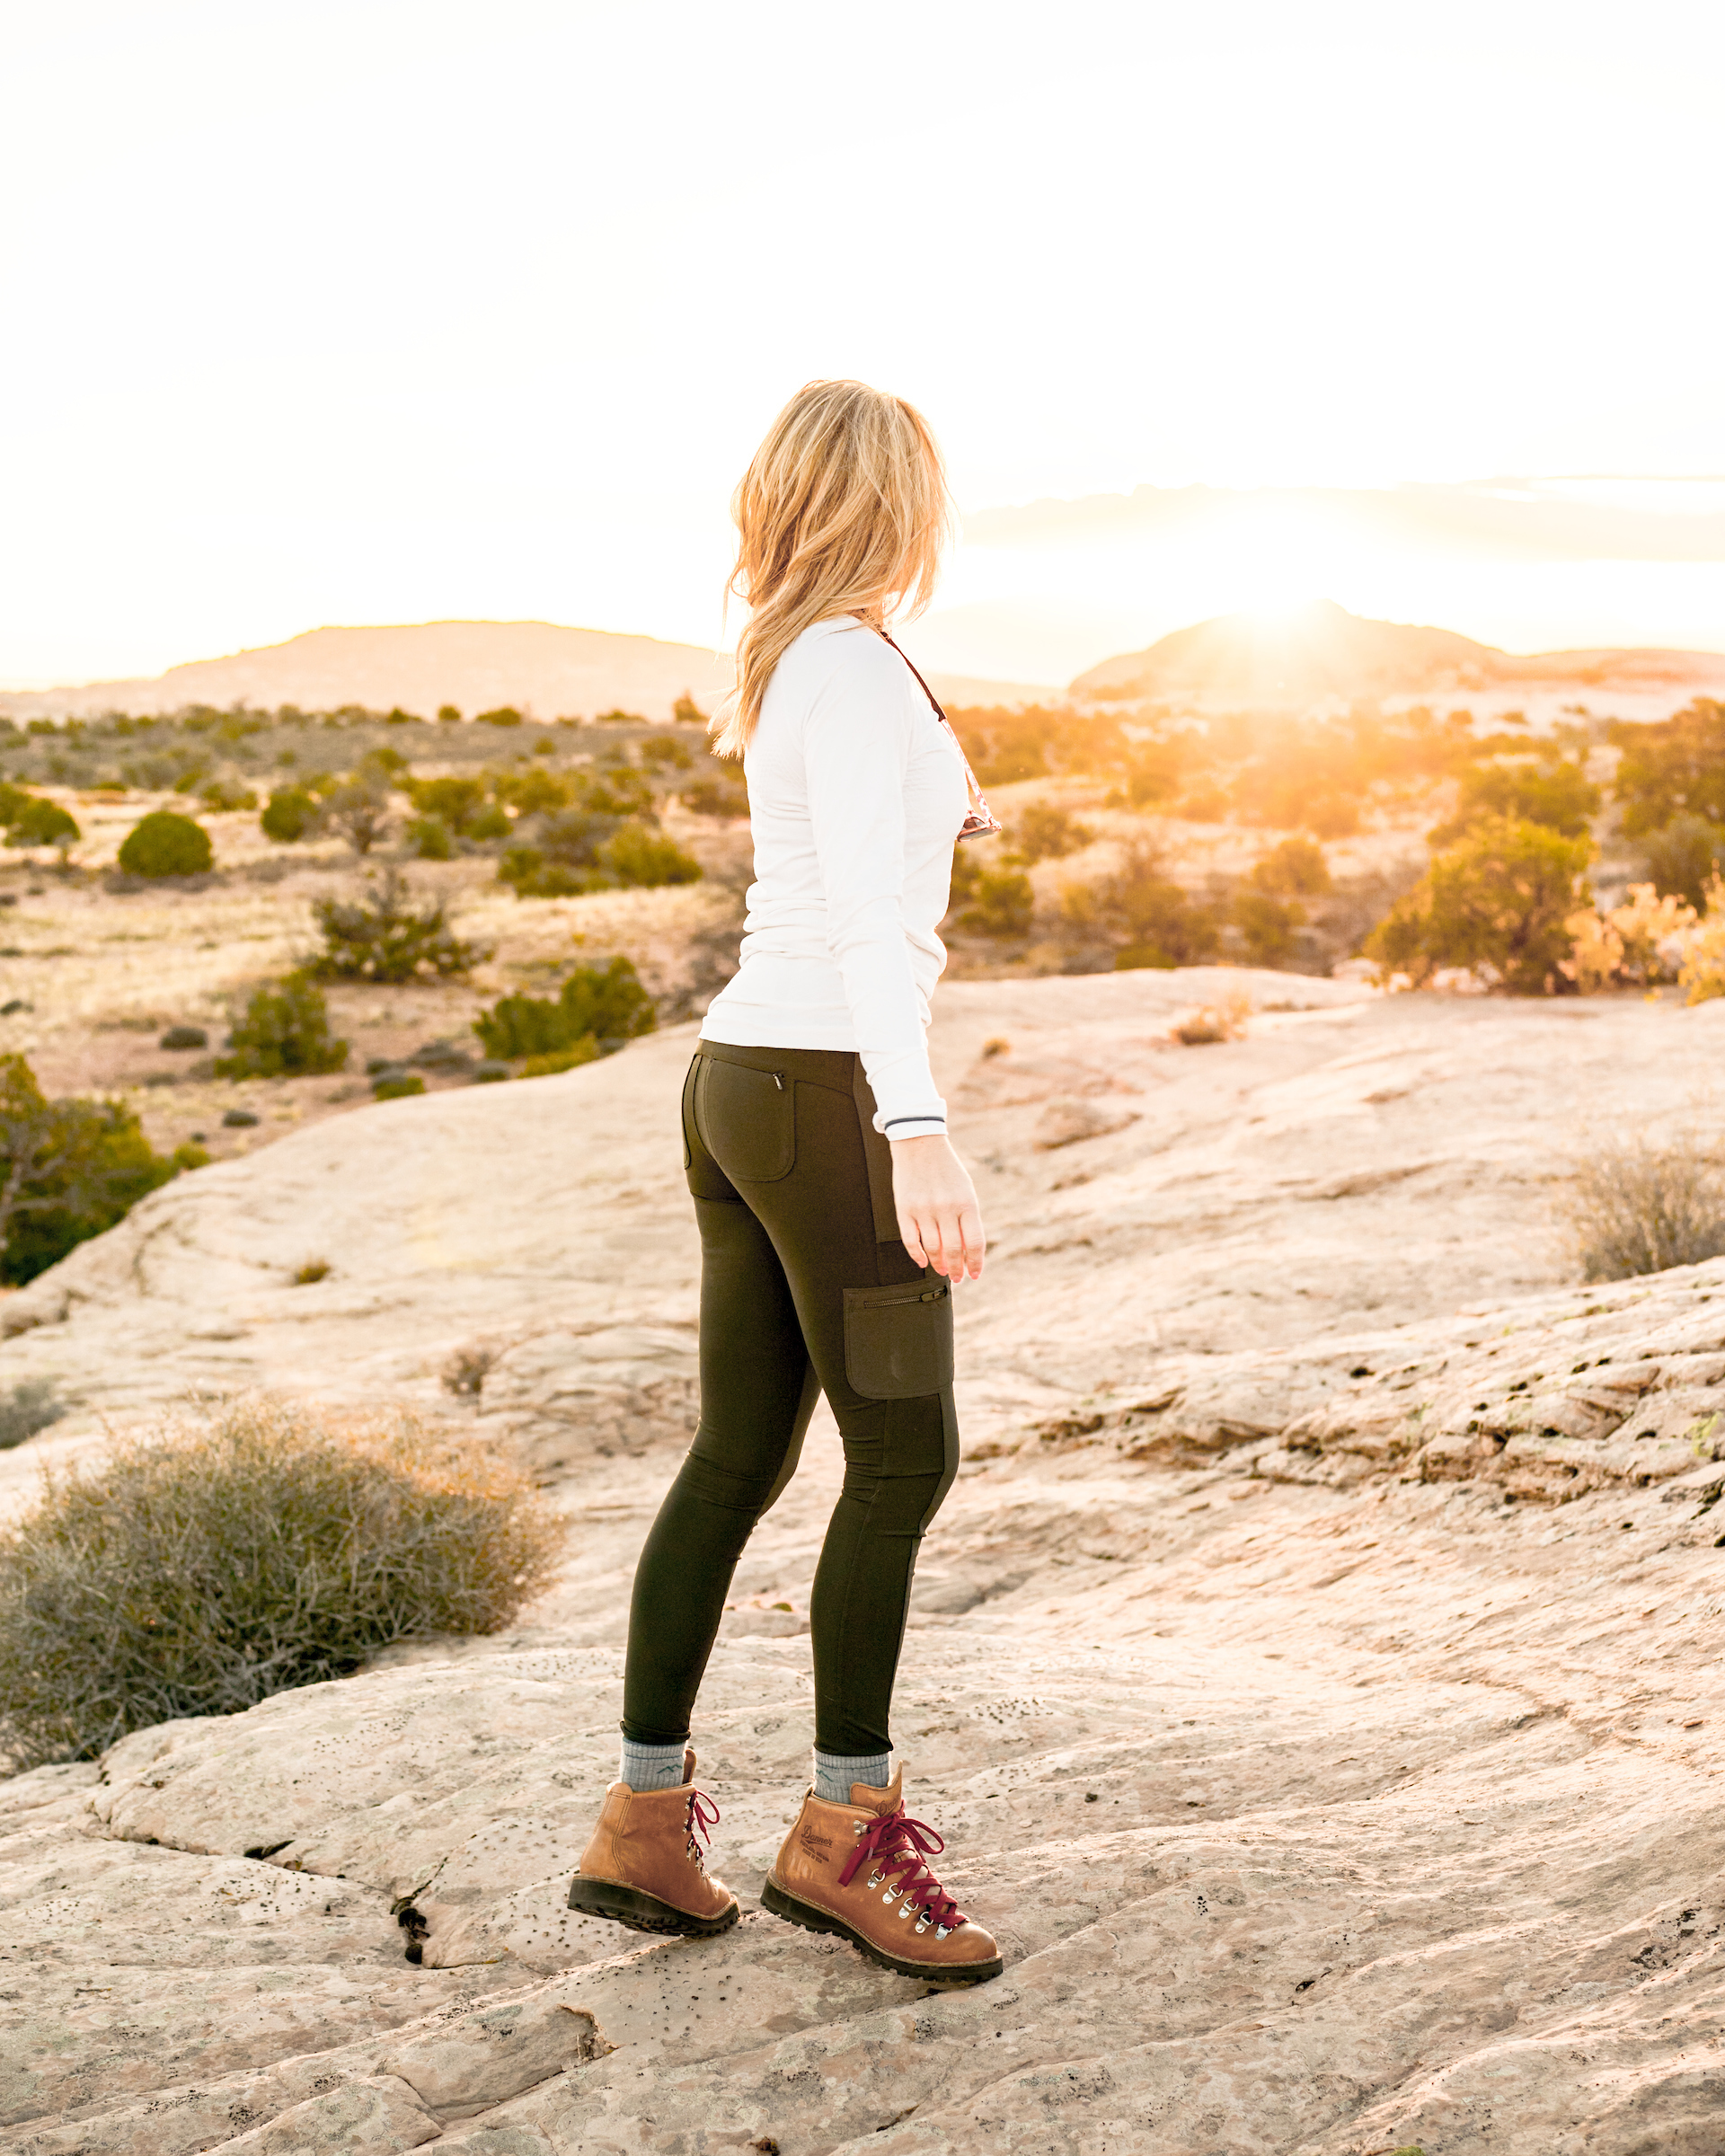 Sunrise photoshoot for Athleta, by Dylan H. Brown